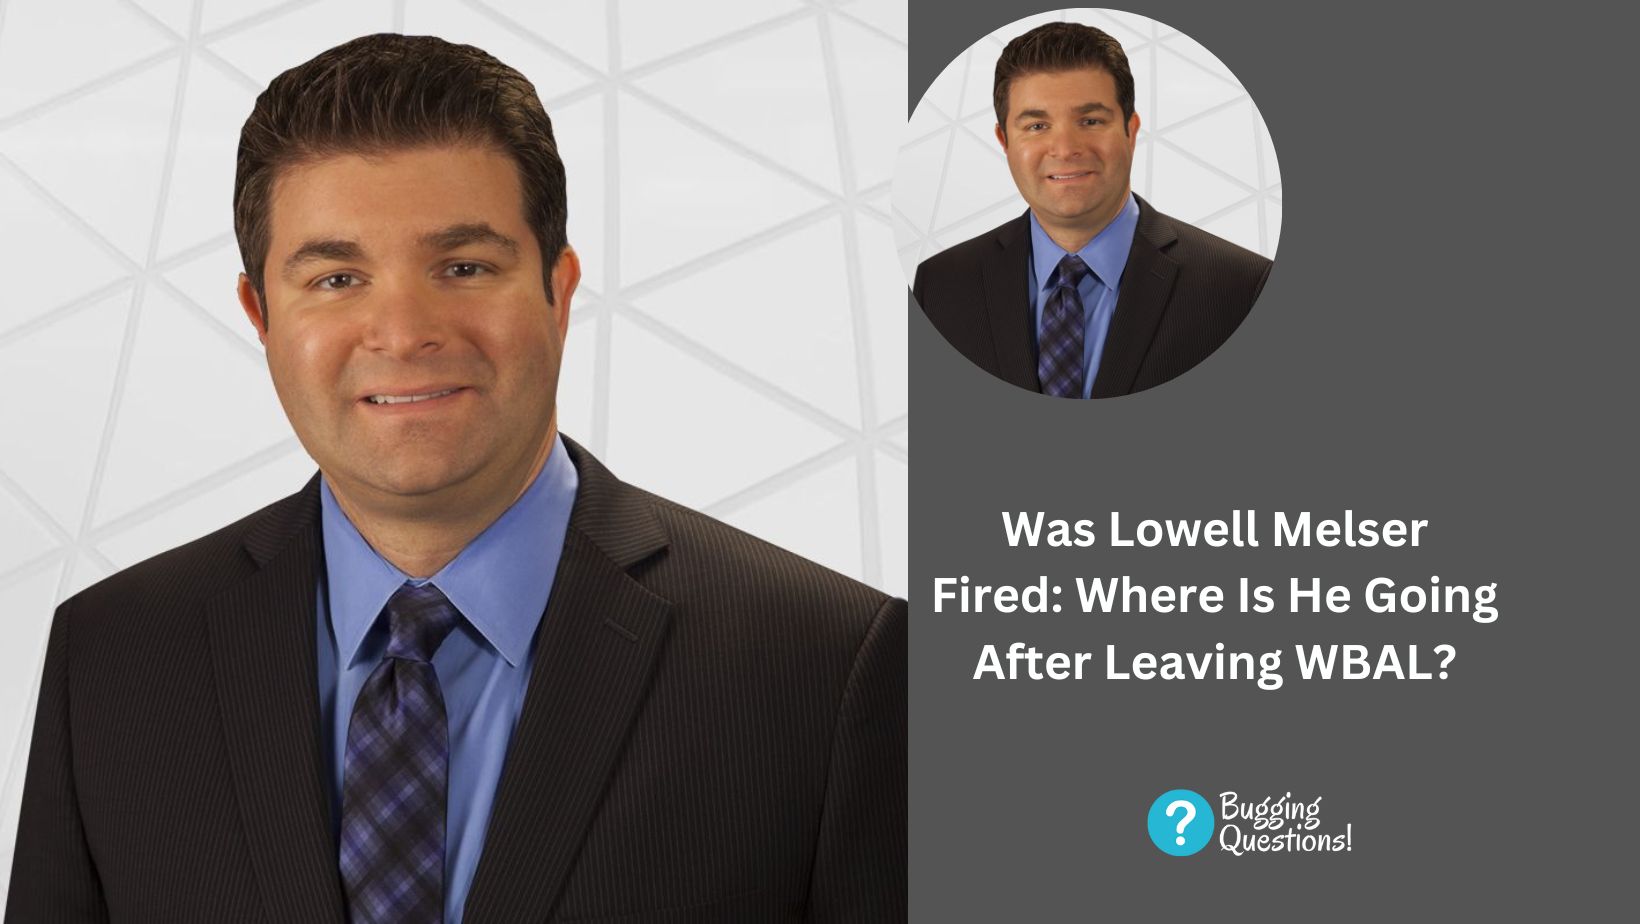 Was Lowell Melser Fired: Where Is He Going After Leaving WBAL?